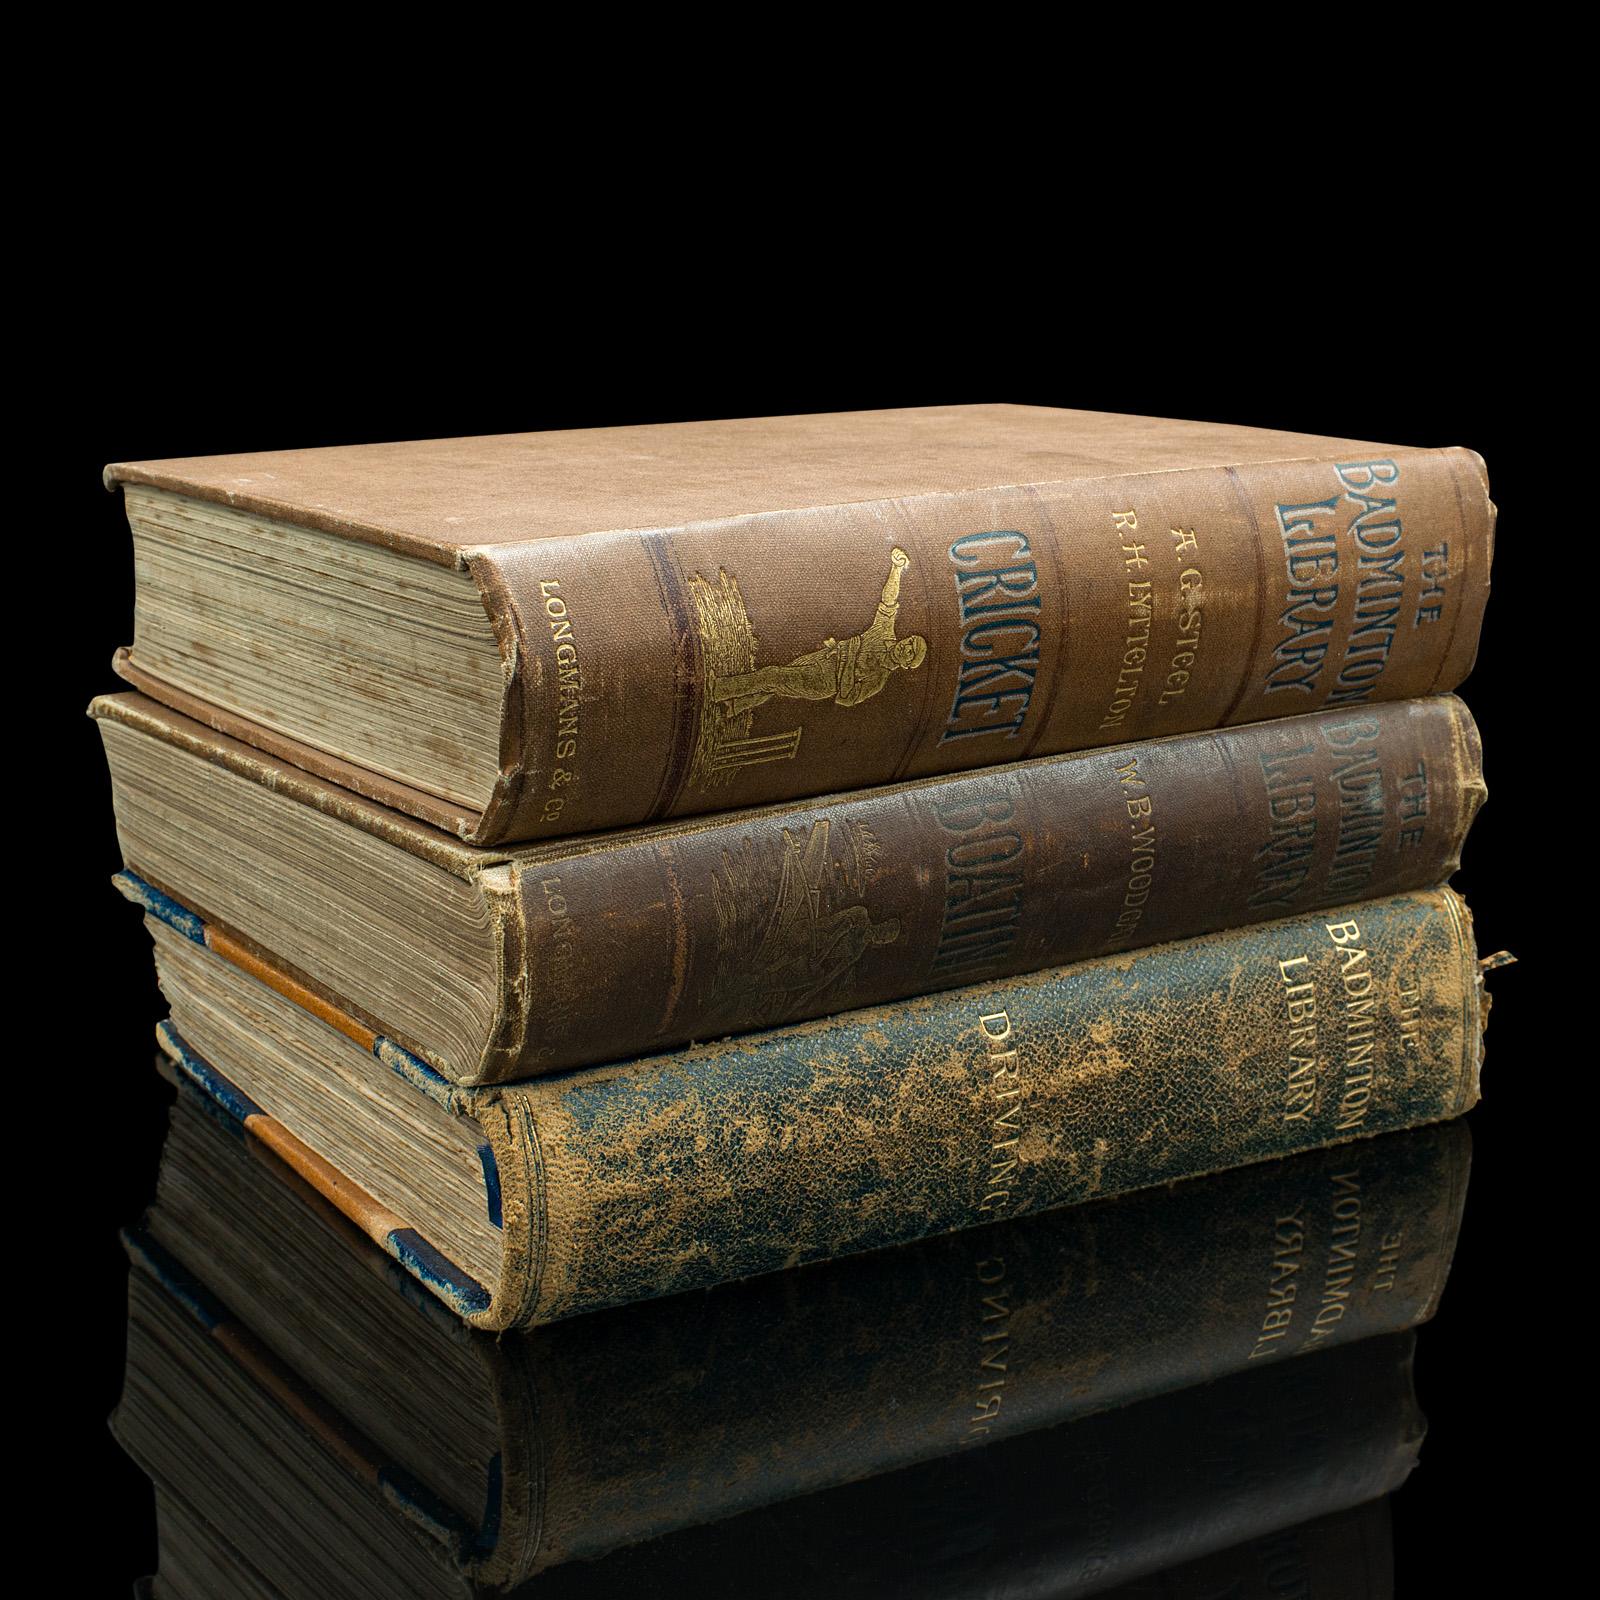 This is a set of 3 antique Badminton Library Books. An English language, hard bound reference title on sporting topics, dating to the late Victorian period, circa 1890.

Dedicated to the Prince of Wales (later Edward VII) the Badminton Library Books